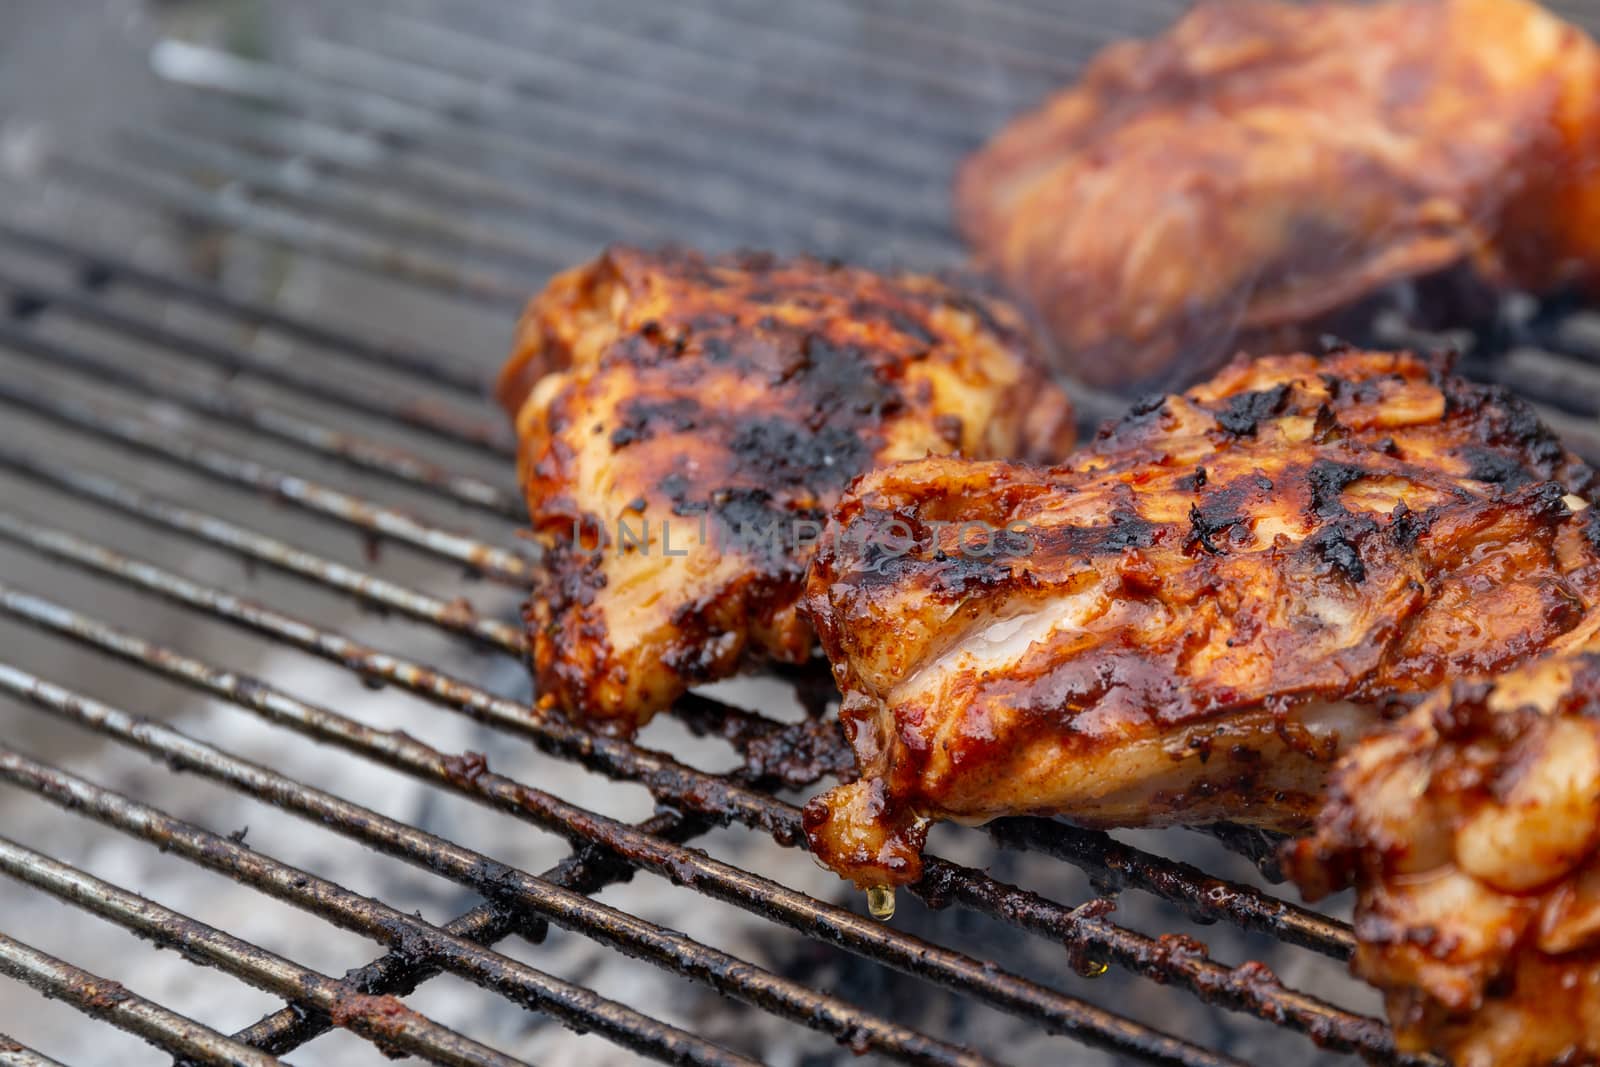 Marinated chicken pieces being cooked on a barbecue